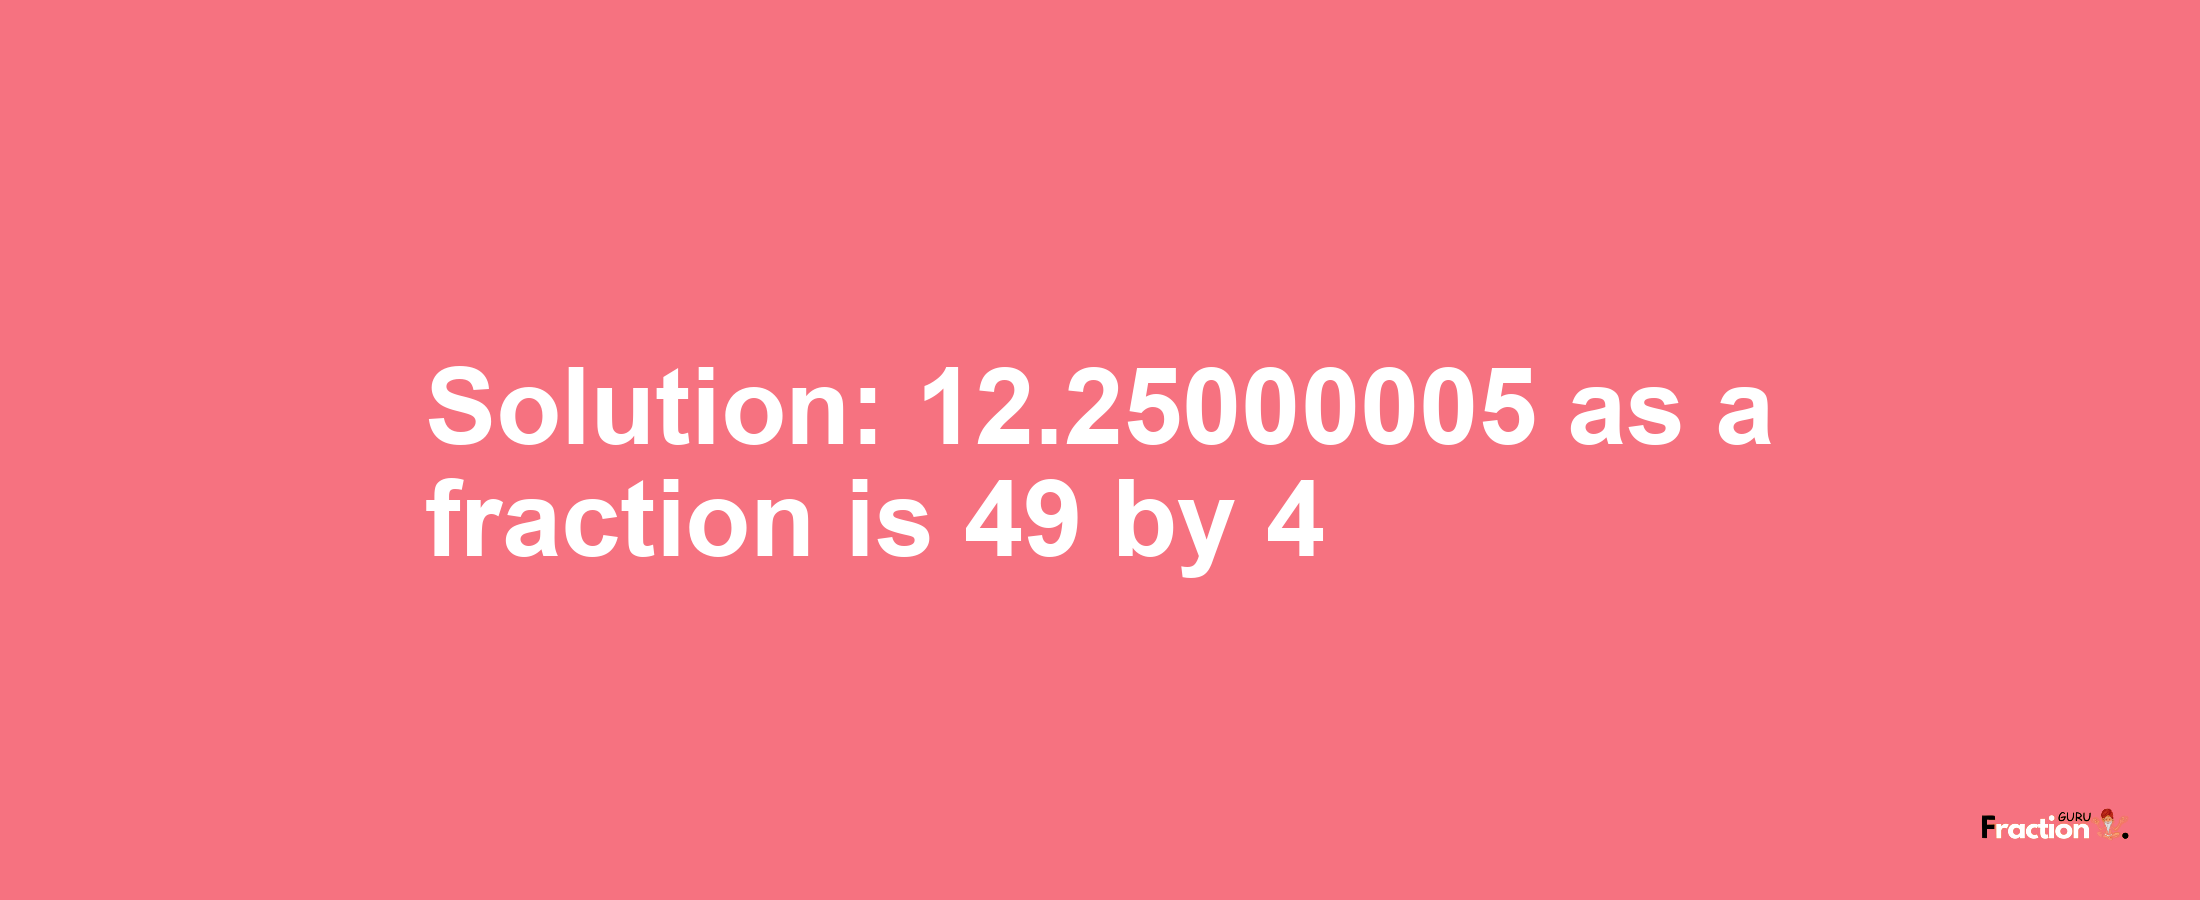 Solution:12.25000005 as a fraction is 49/4